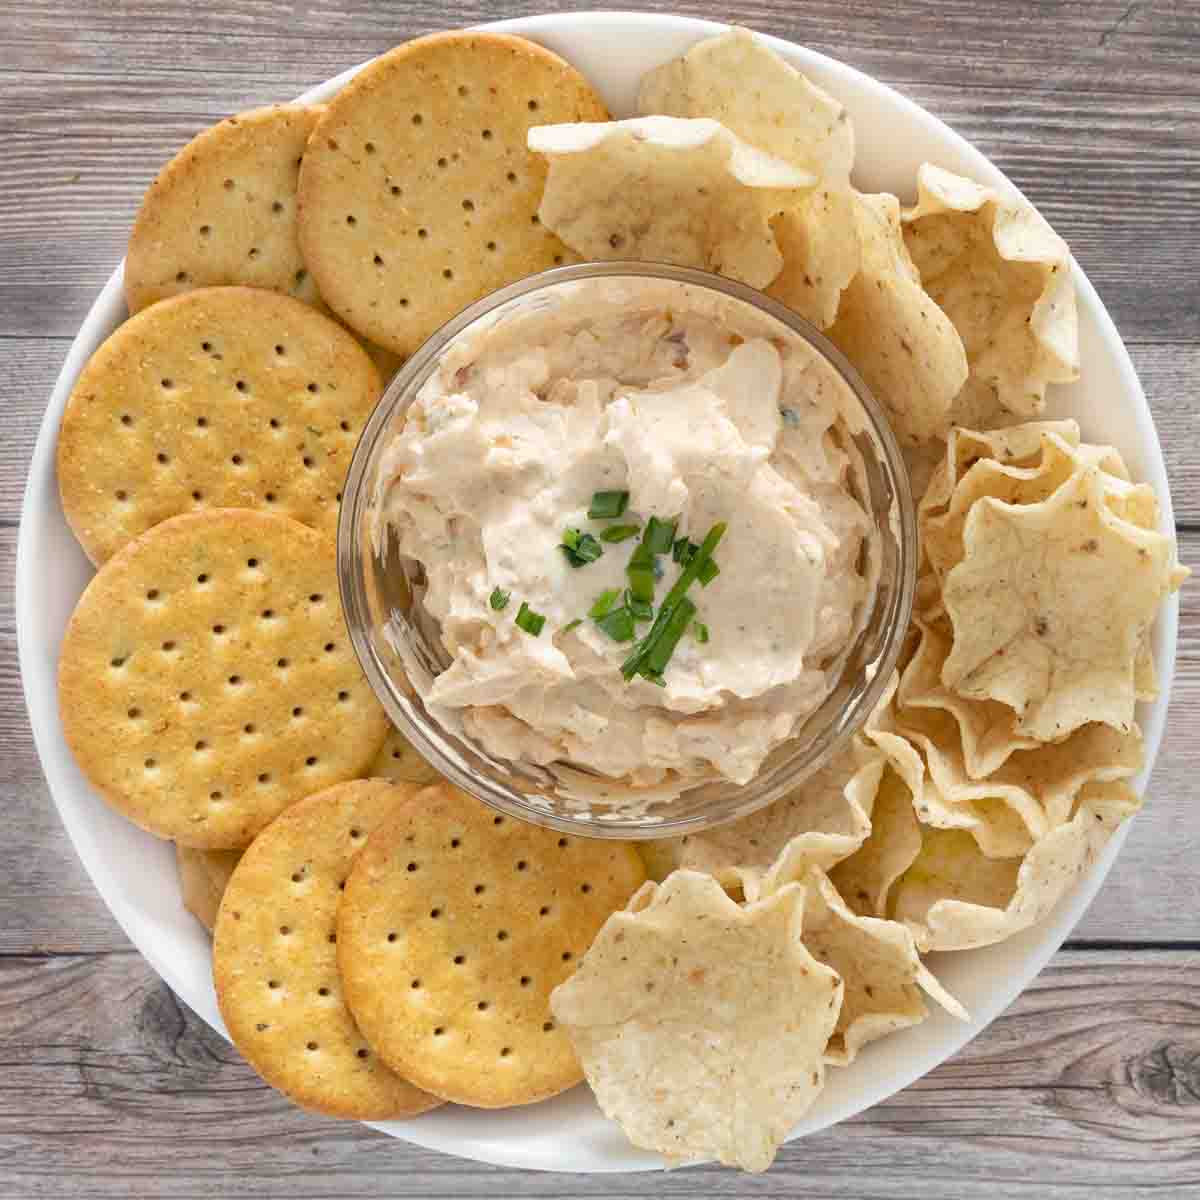 Cold crack dip in glass bowl with crackers and tortilla chips.